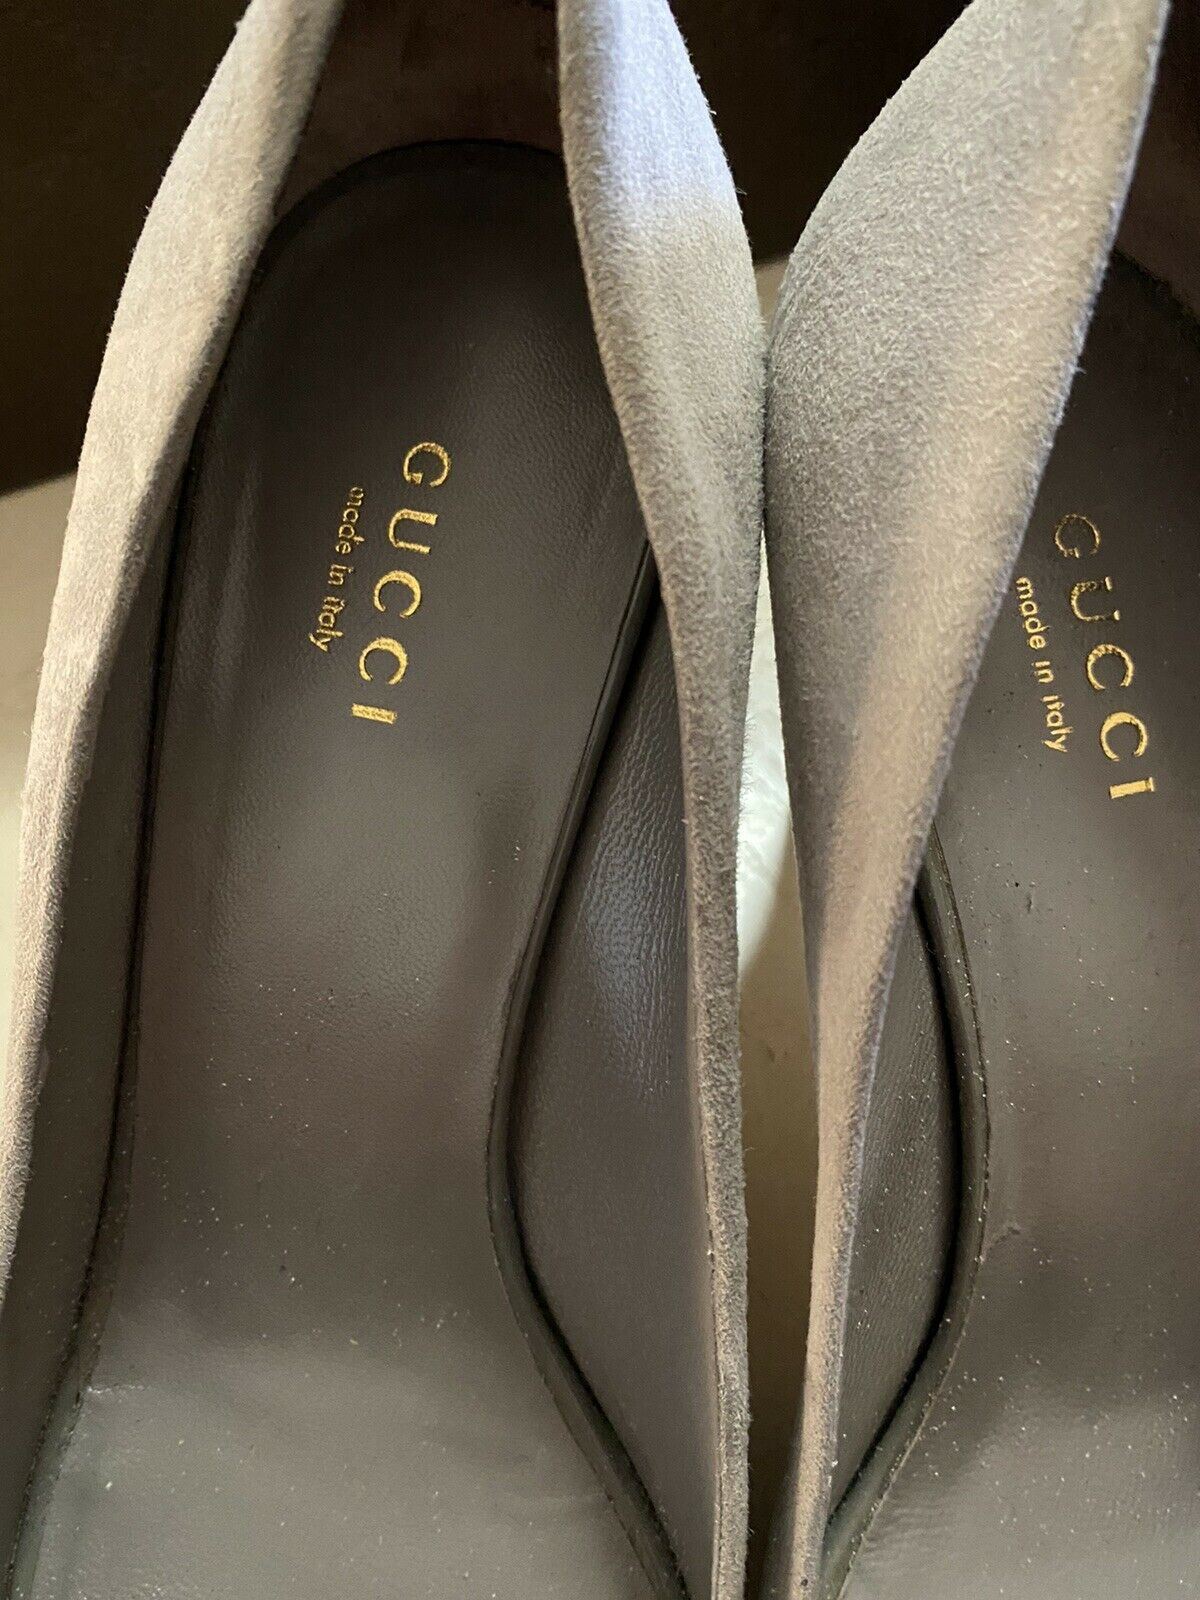 Gucci Women’s Loafers Shoes Gray 8 US ( 38  Eu ) Italy